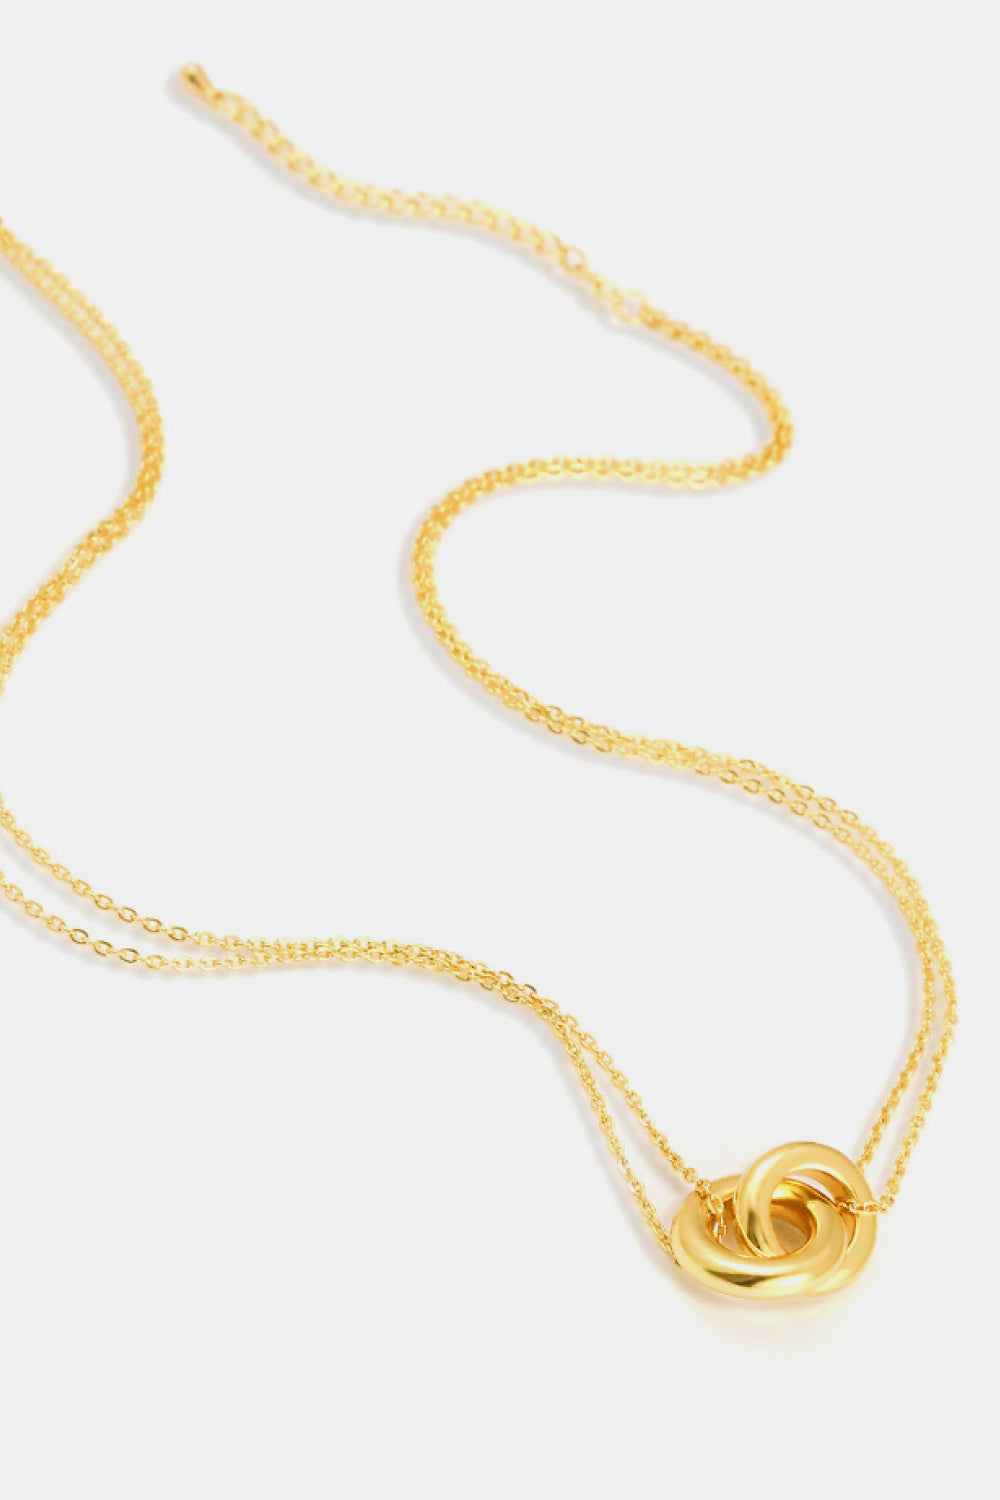 Linked Ring Pendant Chain Necklace - Tigbul's Variety Fashion Shop